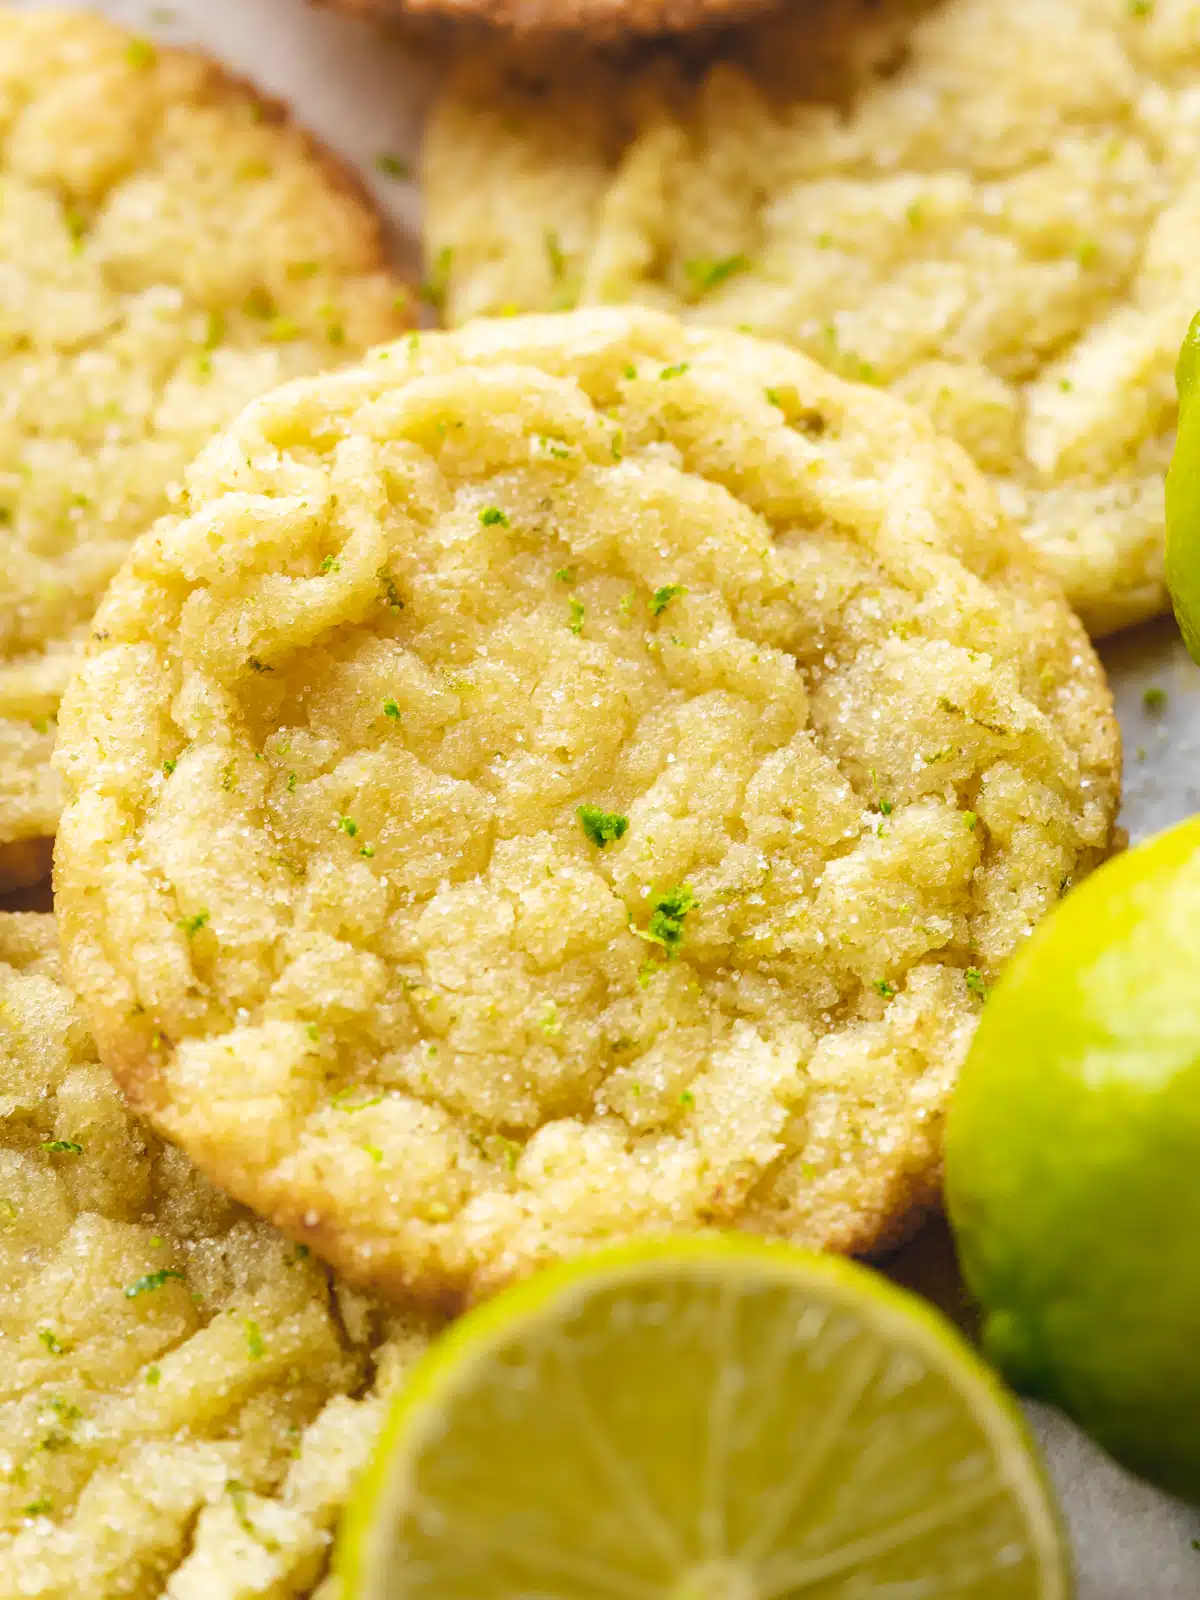 Closeup shot of a sugar and lime-zest coated vegan key lime cookie with a halved lime in the foreground and a pile of more cookies blurred out in the background.